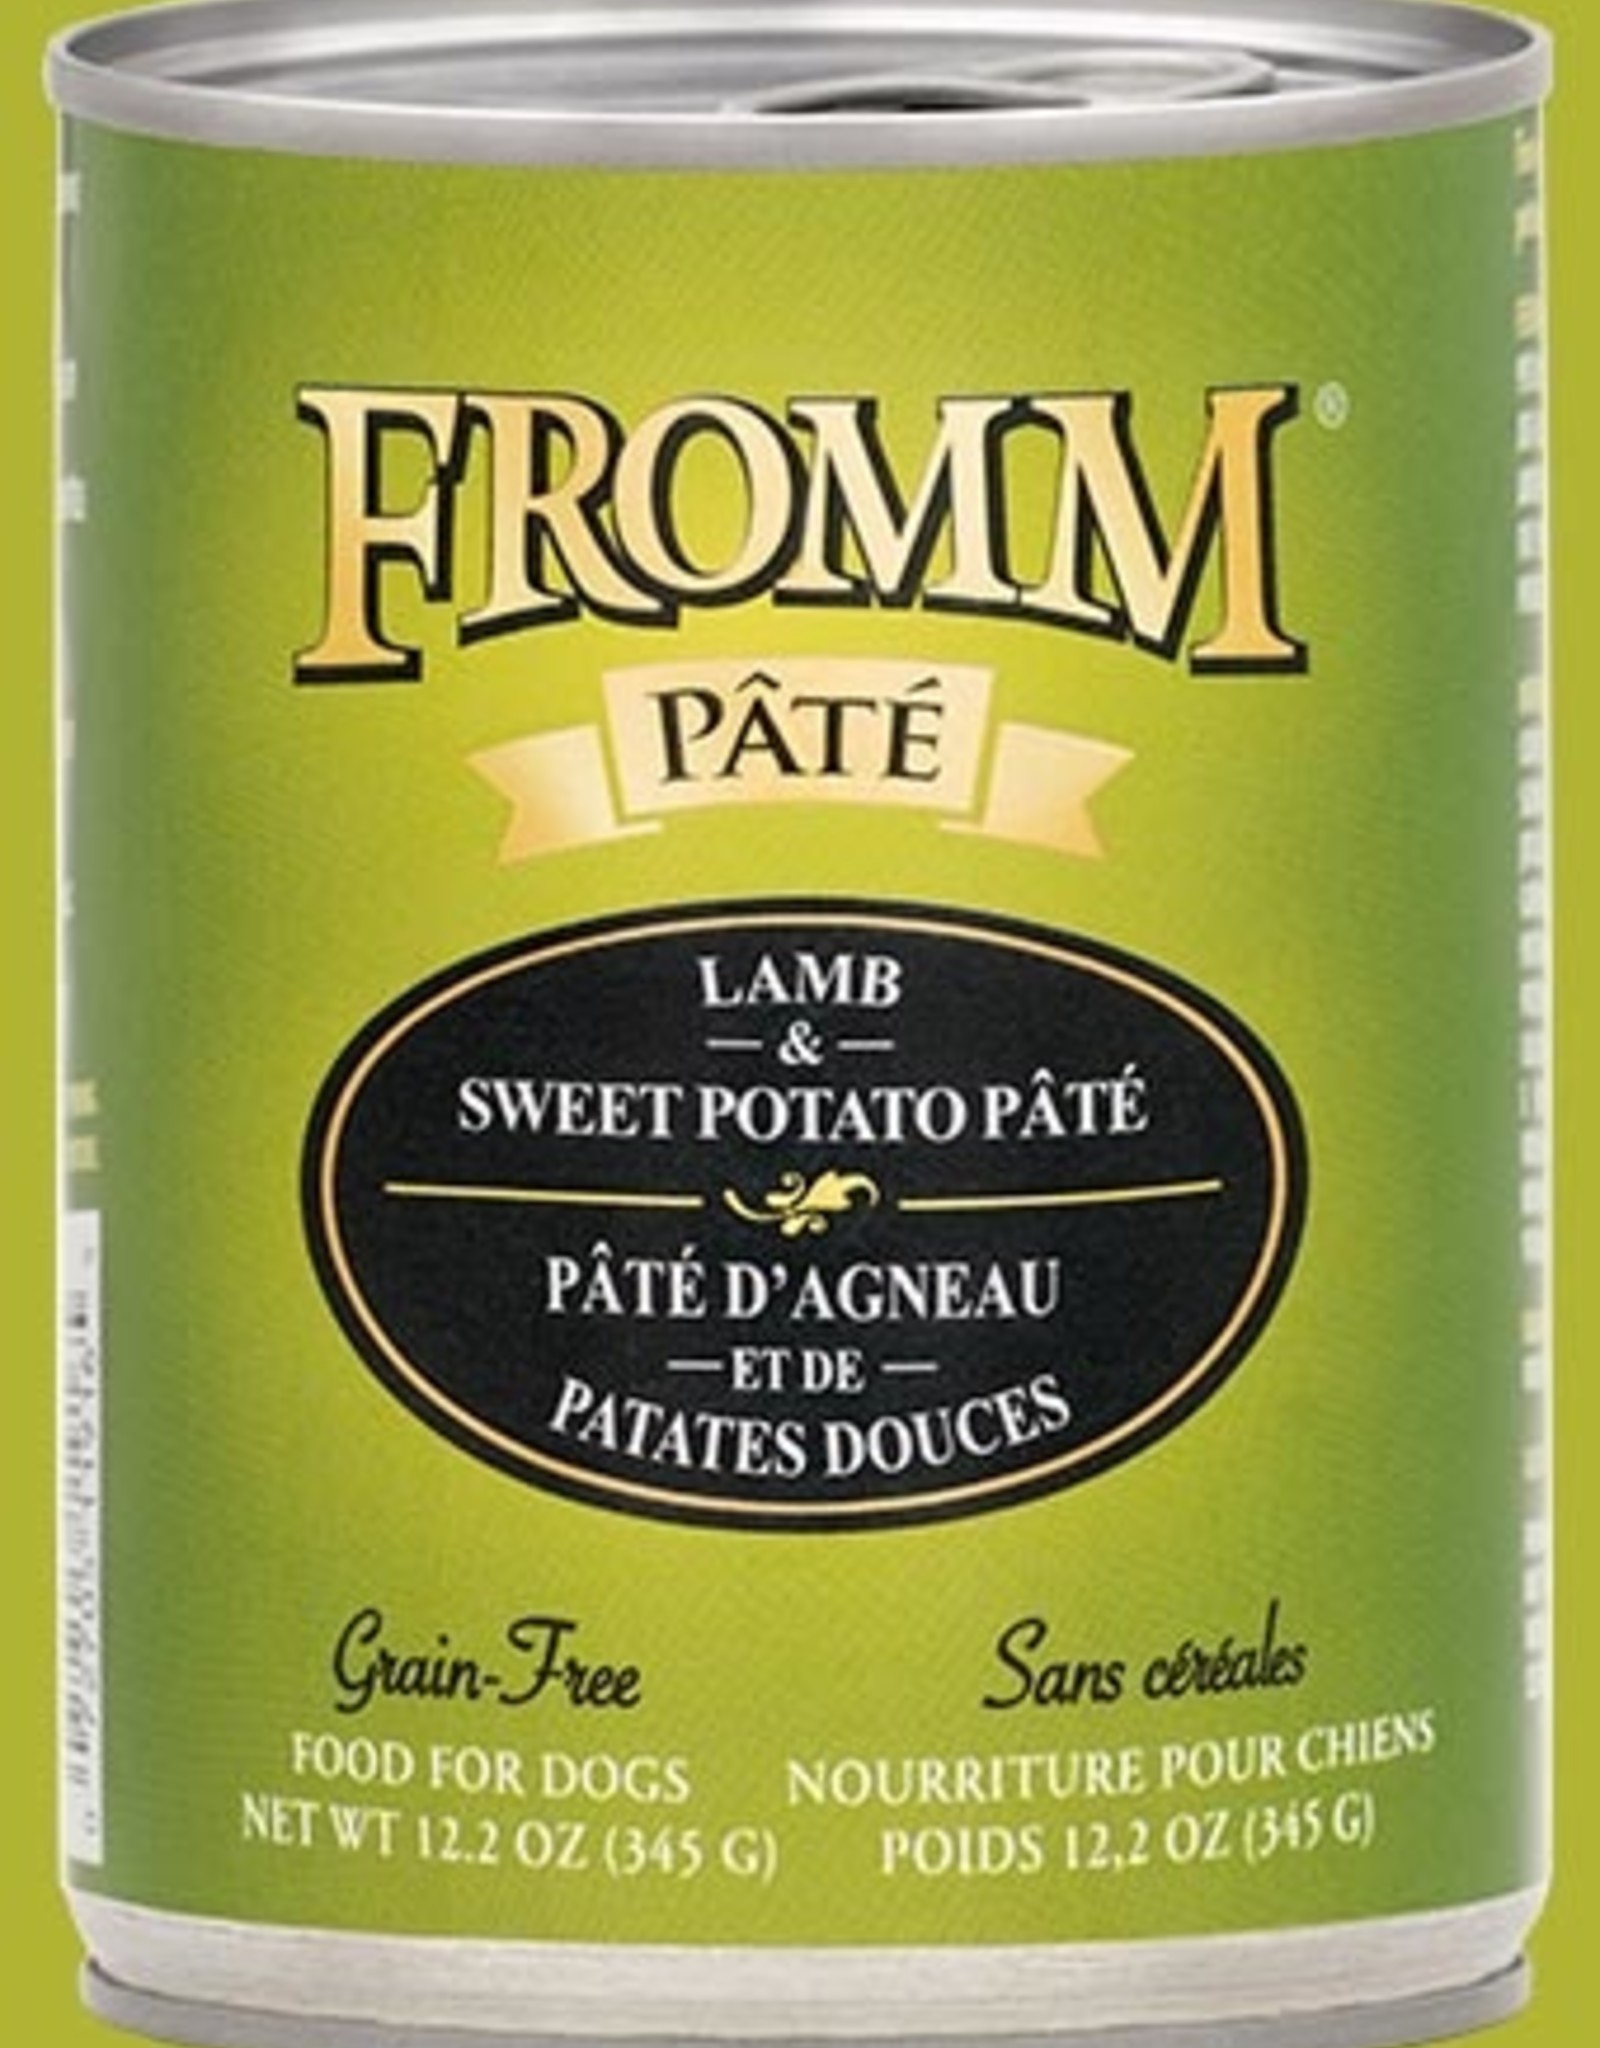 Fromm Dog Grain Free Pate Lamb Sweet Potato Can 12 2oz Pickering Valley Feed Farm Store